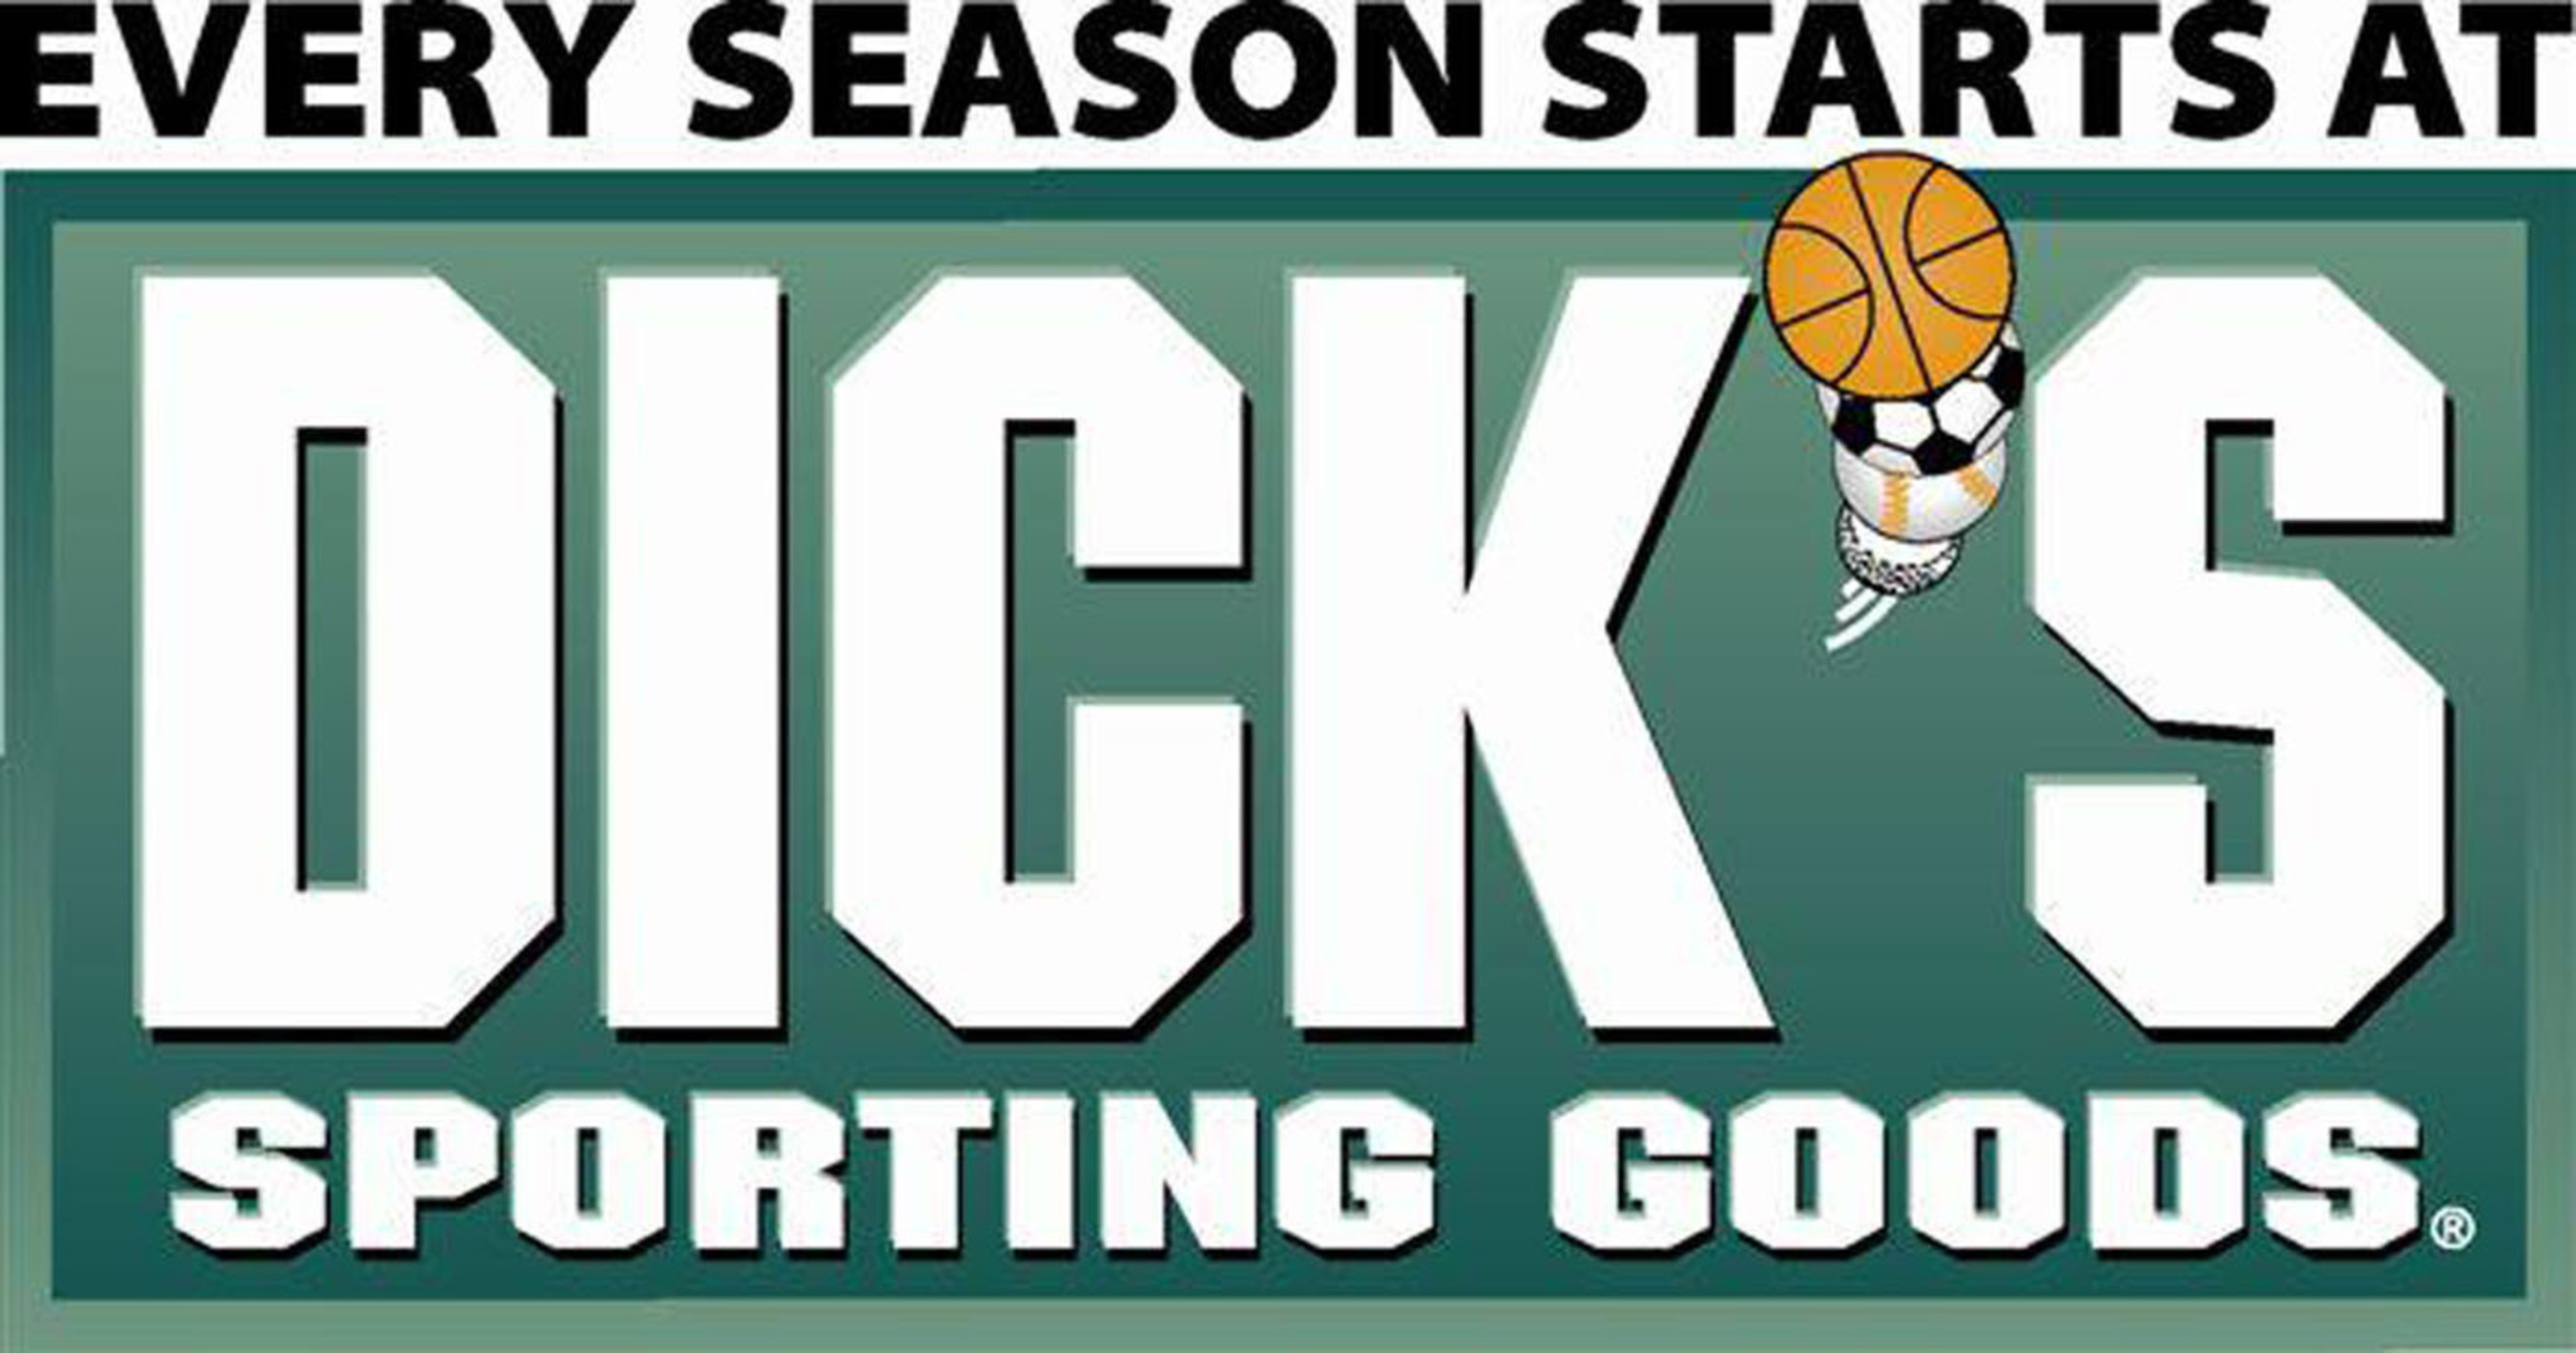 Dick S Sporting Goods Enhances Mobile App To Reward Customers For An